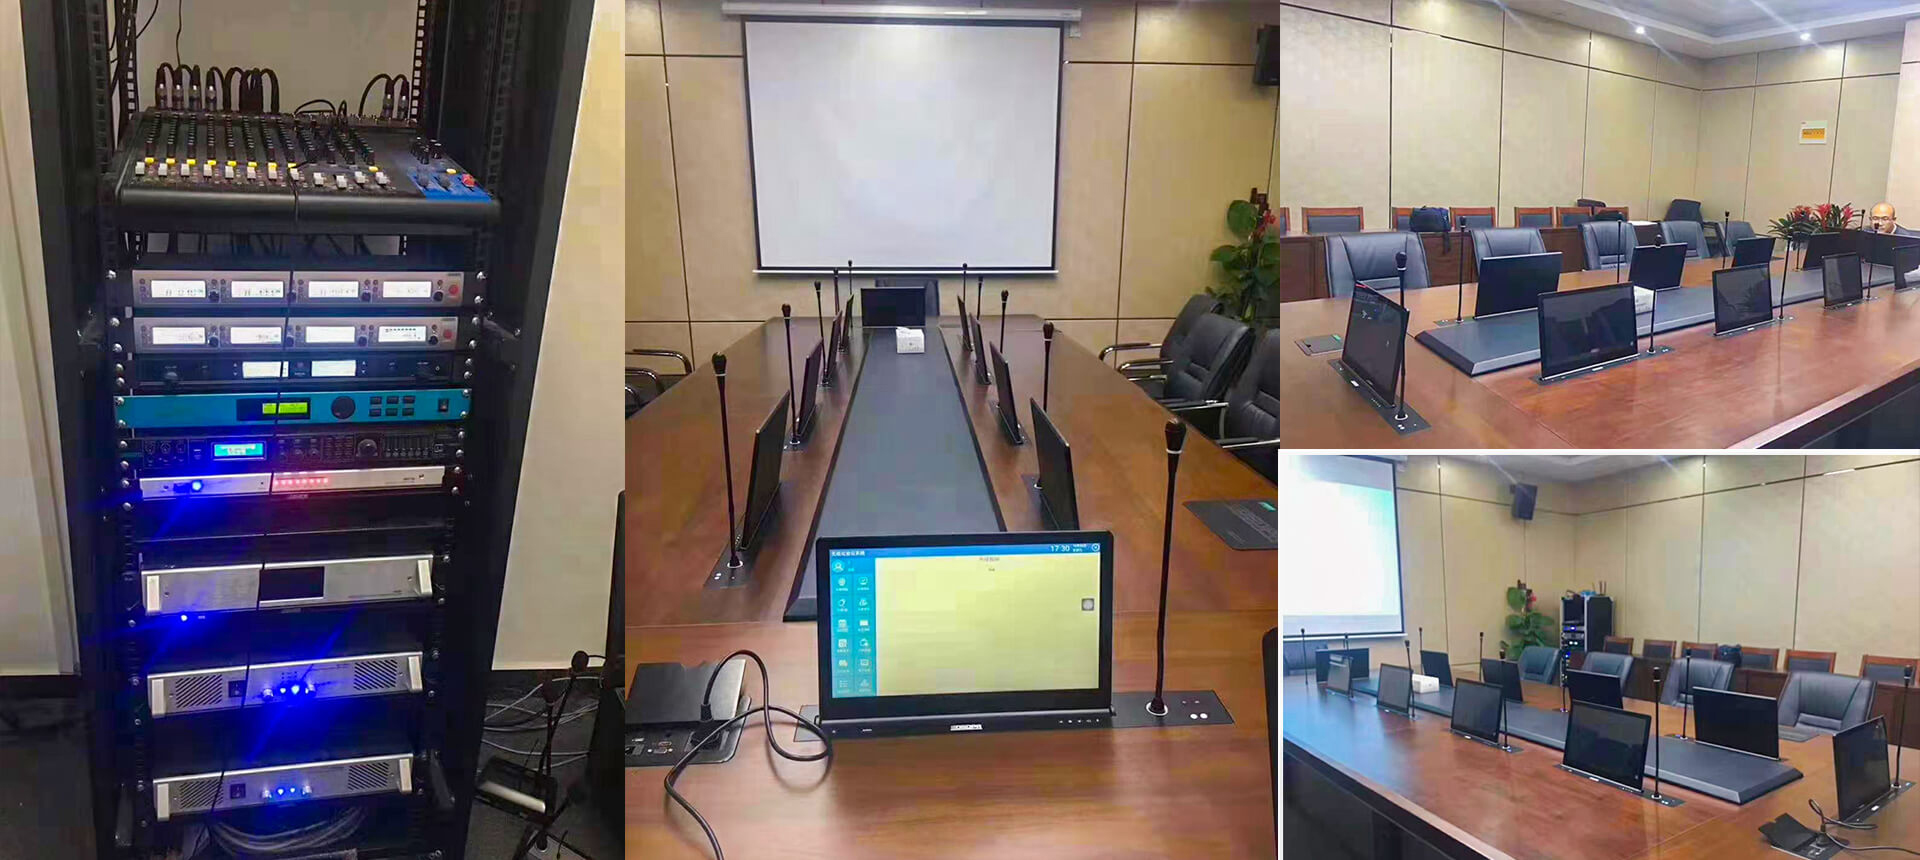 Paperless Conference System | Project Gallerya